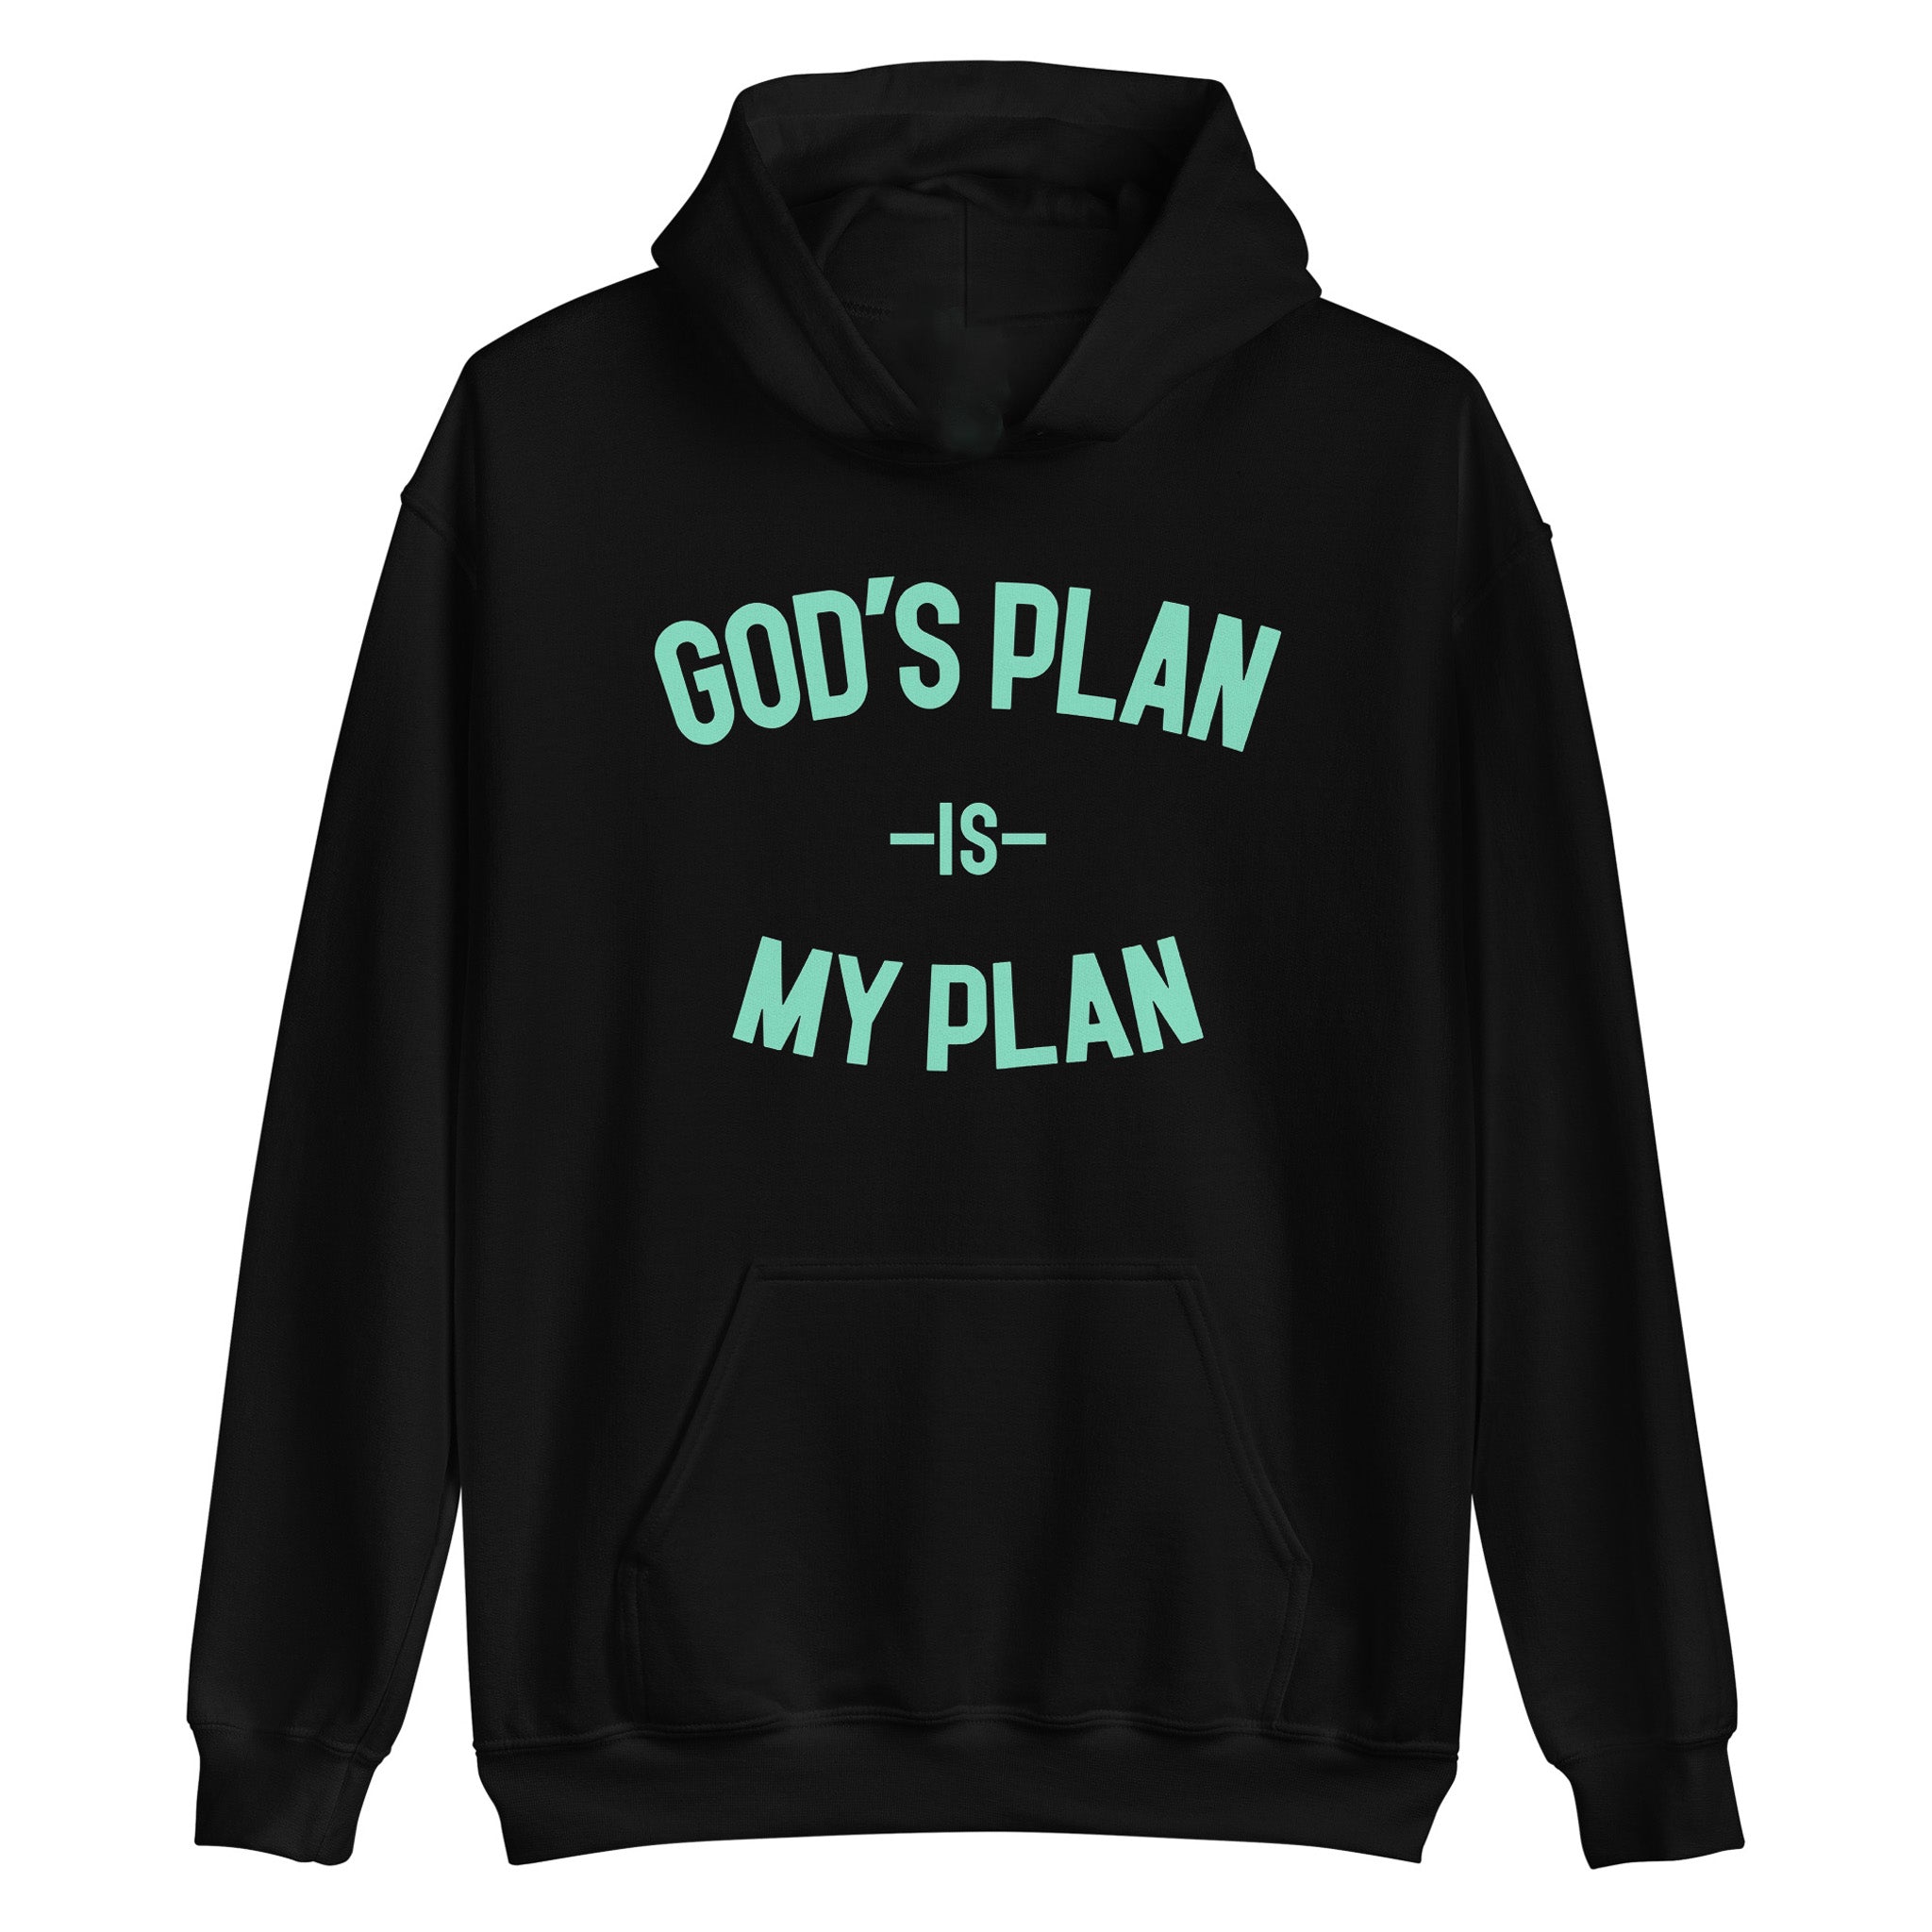 God's Plan My Plan Inspire, Used By God, Used By God Clothing, Christian Apparel, Christian Hoodies, Christian Clothing, Christian Shirts, God Shirts, Christian Sweatshirts, God Clothing, Jesus Hoodie, christian clothing t shirts, Jesus Clothes, t-shirts about jesus, hoodies near me, Christian Tshirts, God Is Dope, Art Of Homage, Red Letter Clothing, Elevated Faith, Active Faith Sports, Beacon Threads, God The Father Apparel